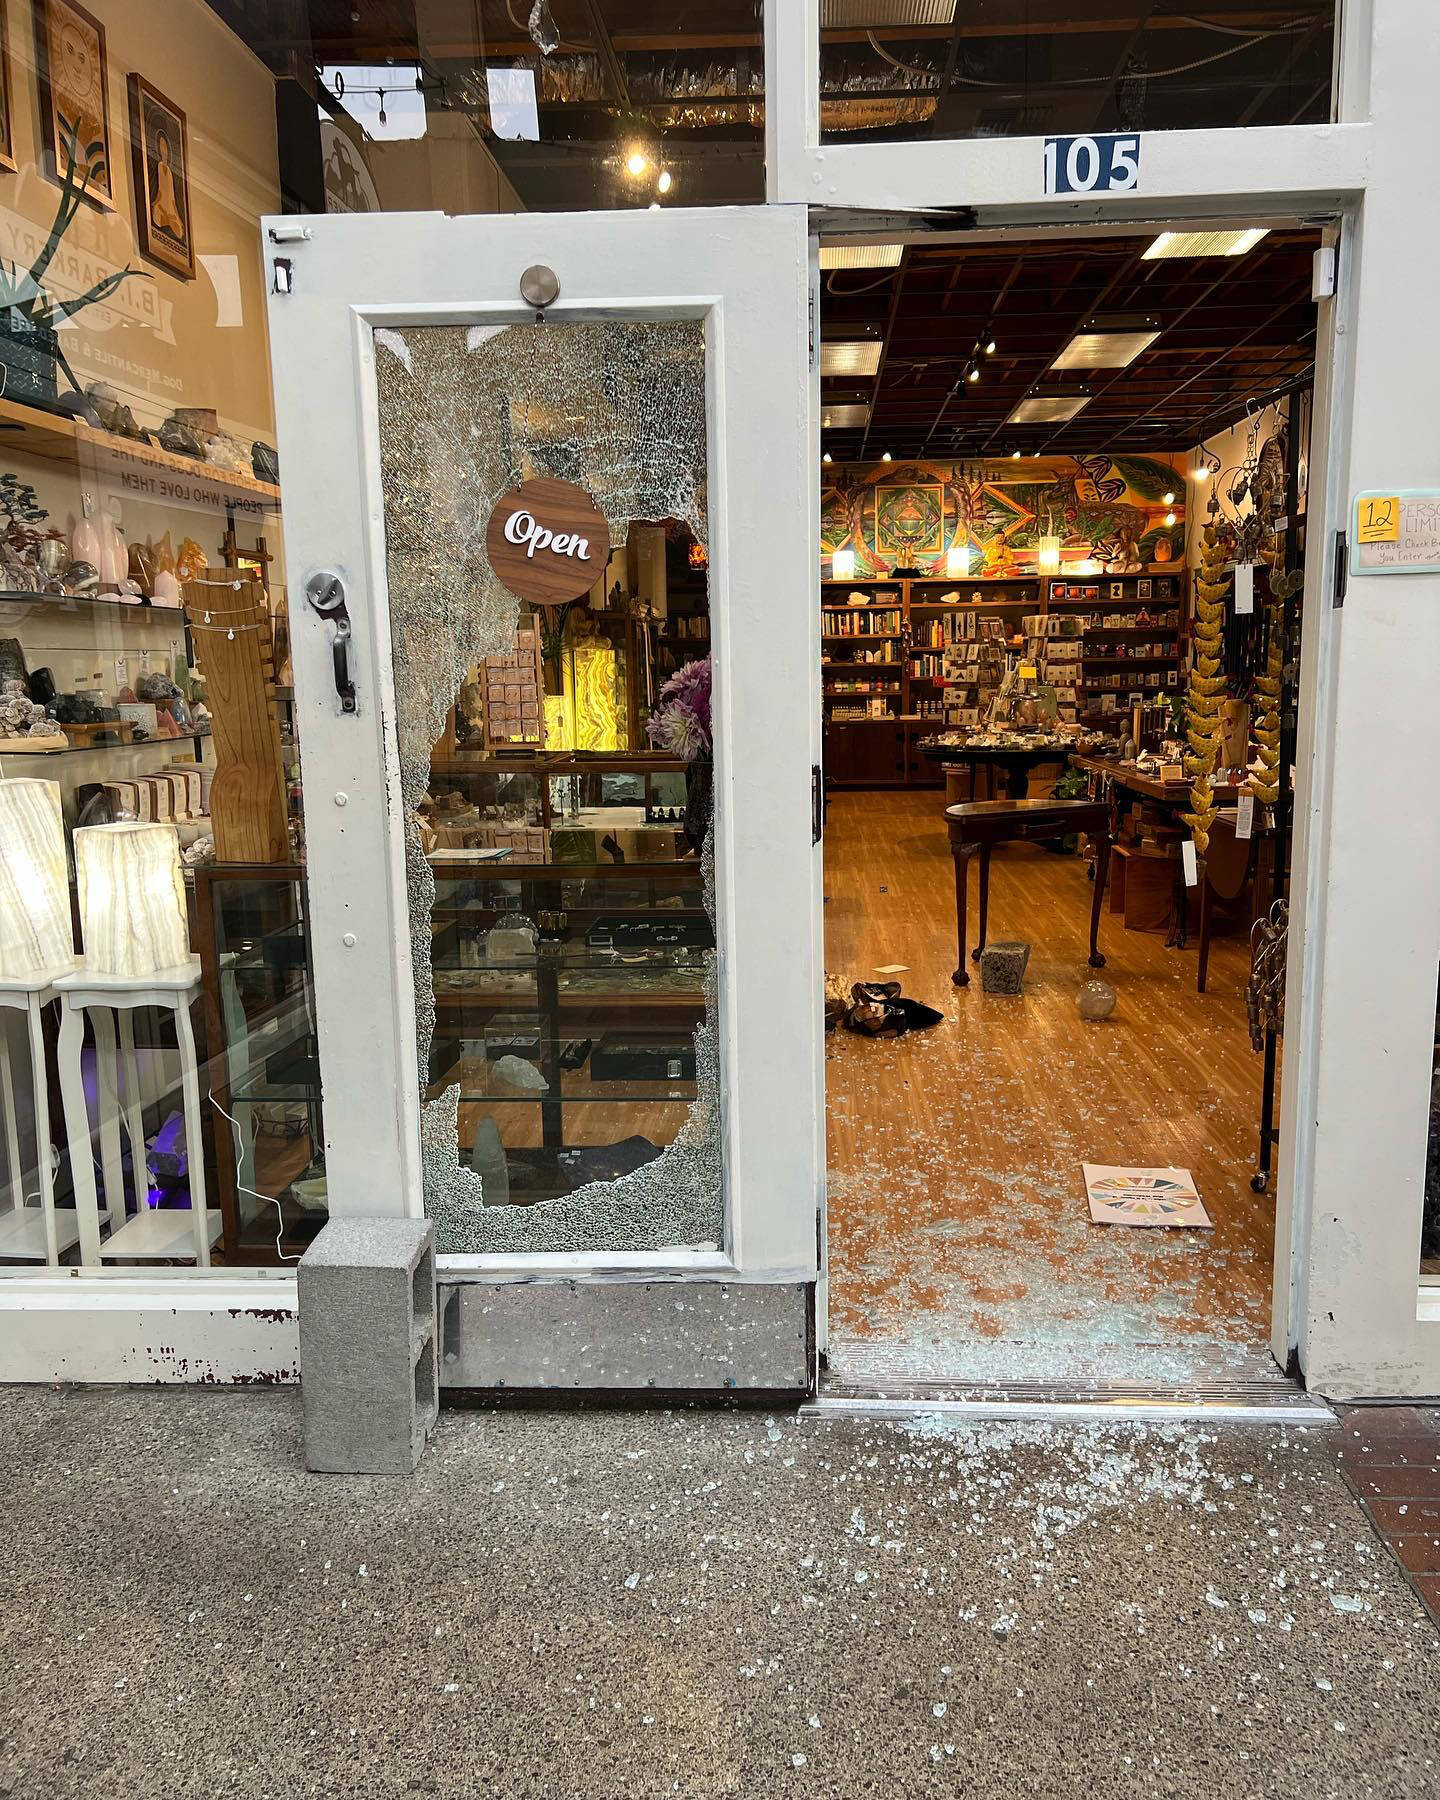 The Hidden Gem store in the Winslow Mall was burglarized on Oct. 17. Courtesy Photos